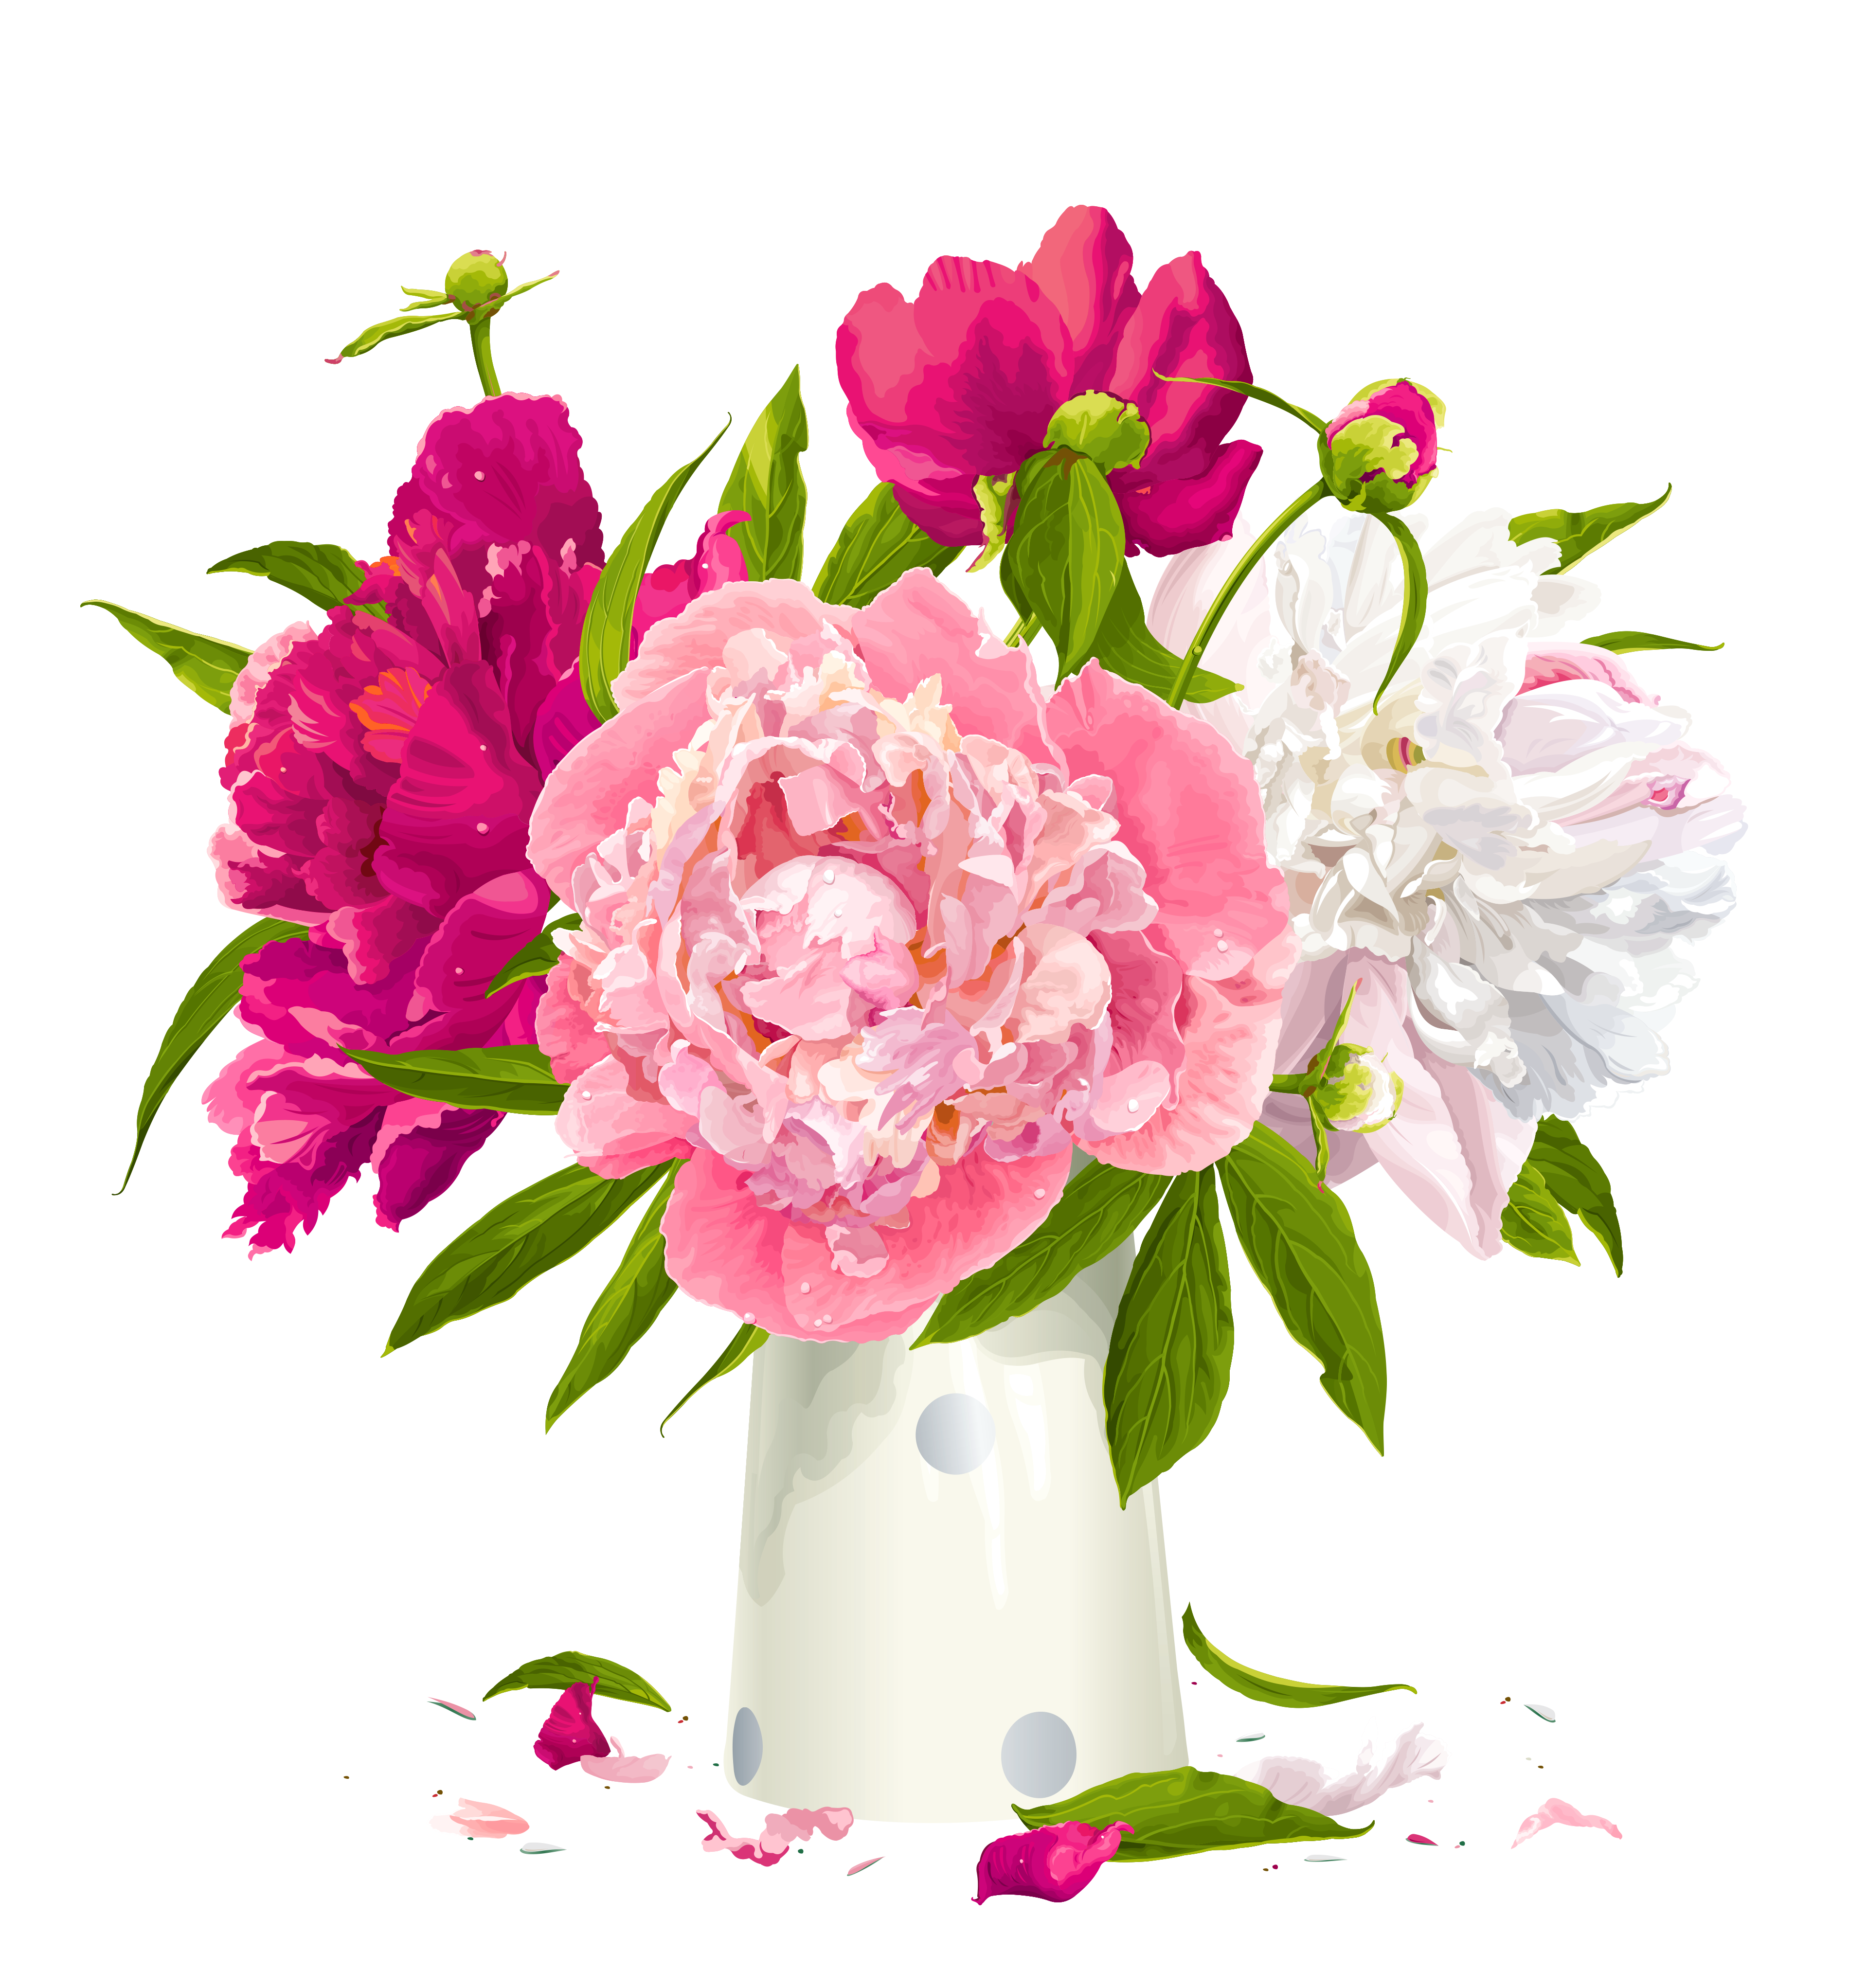 Vase_with_Peonies_Clipart.png?m=1399672800.